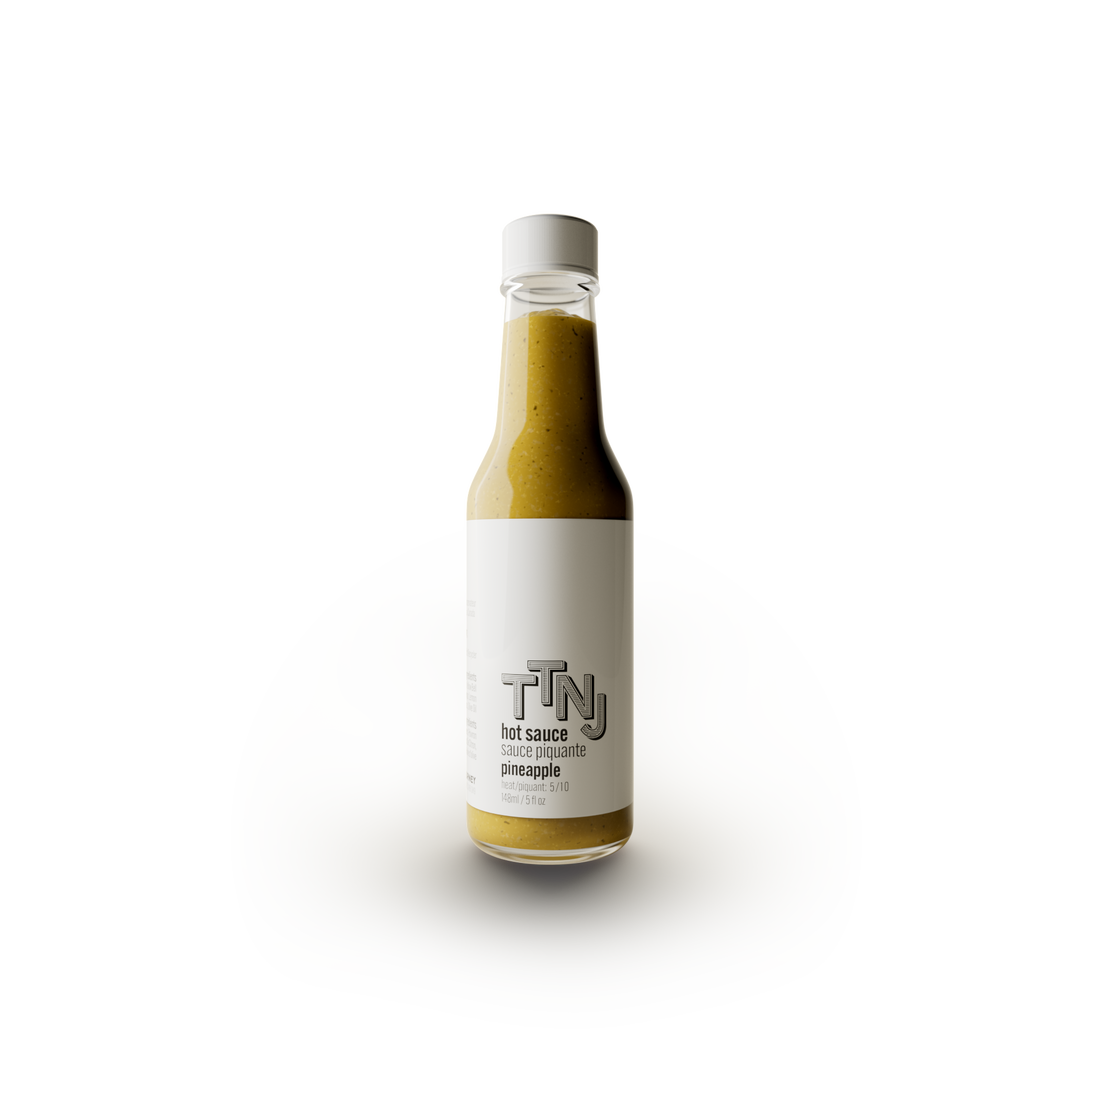 TTNJ - Pineapple Hot Sauce in glass jar with white label